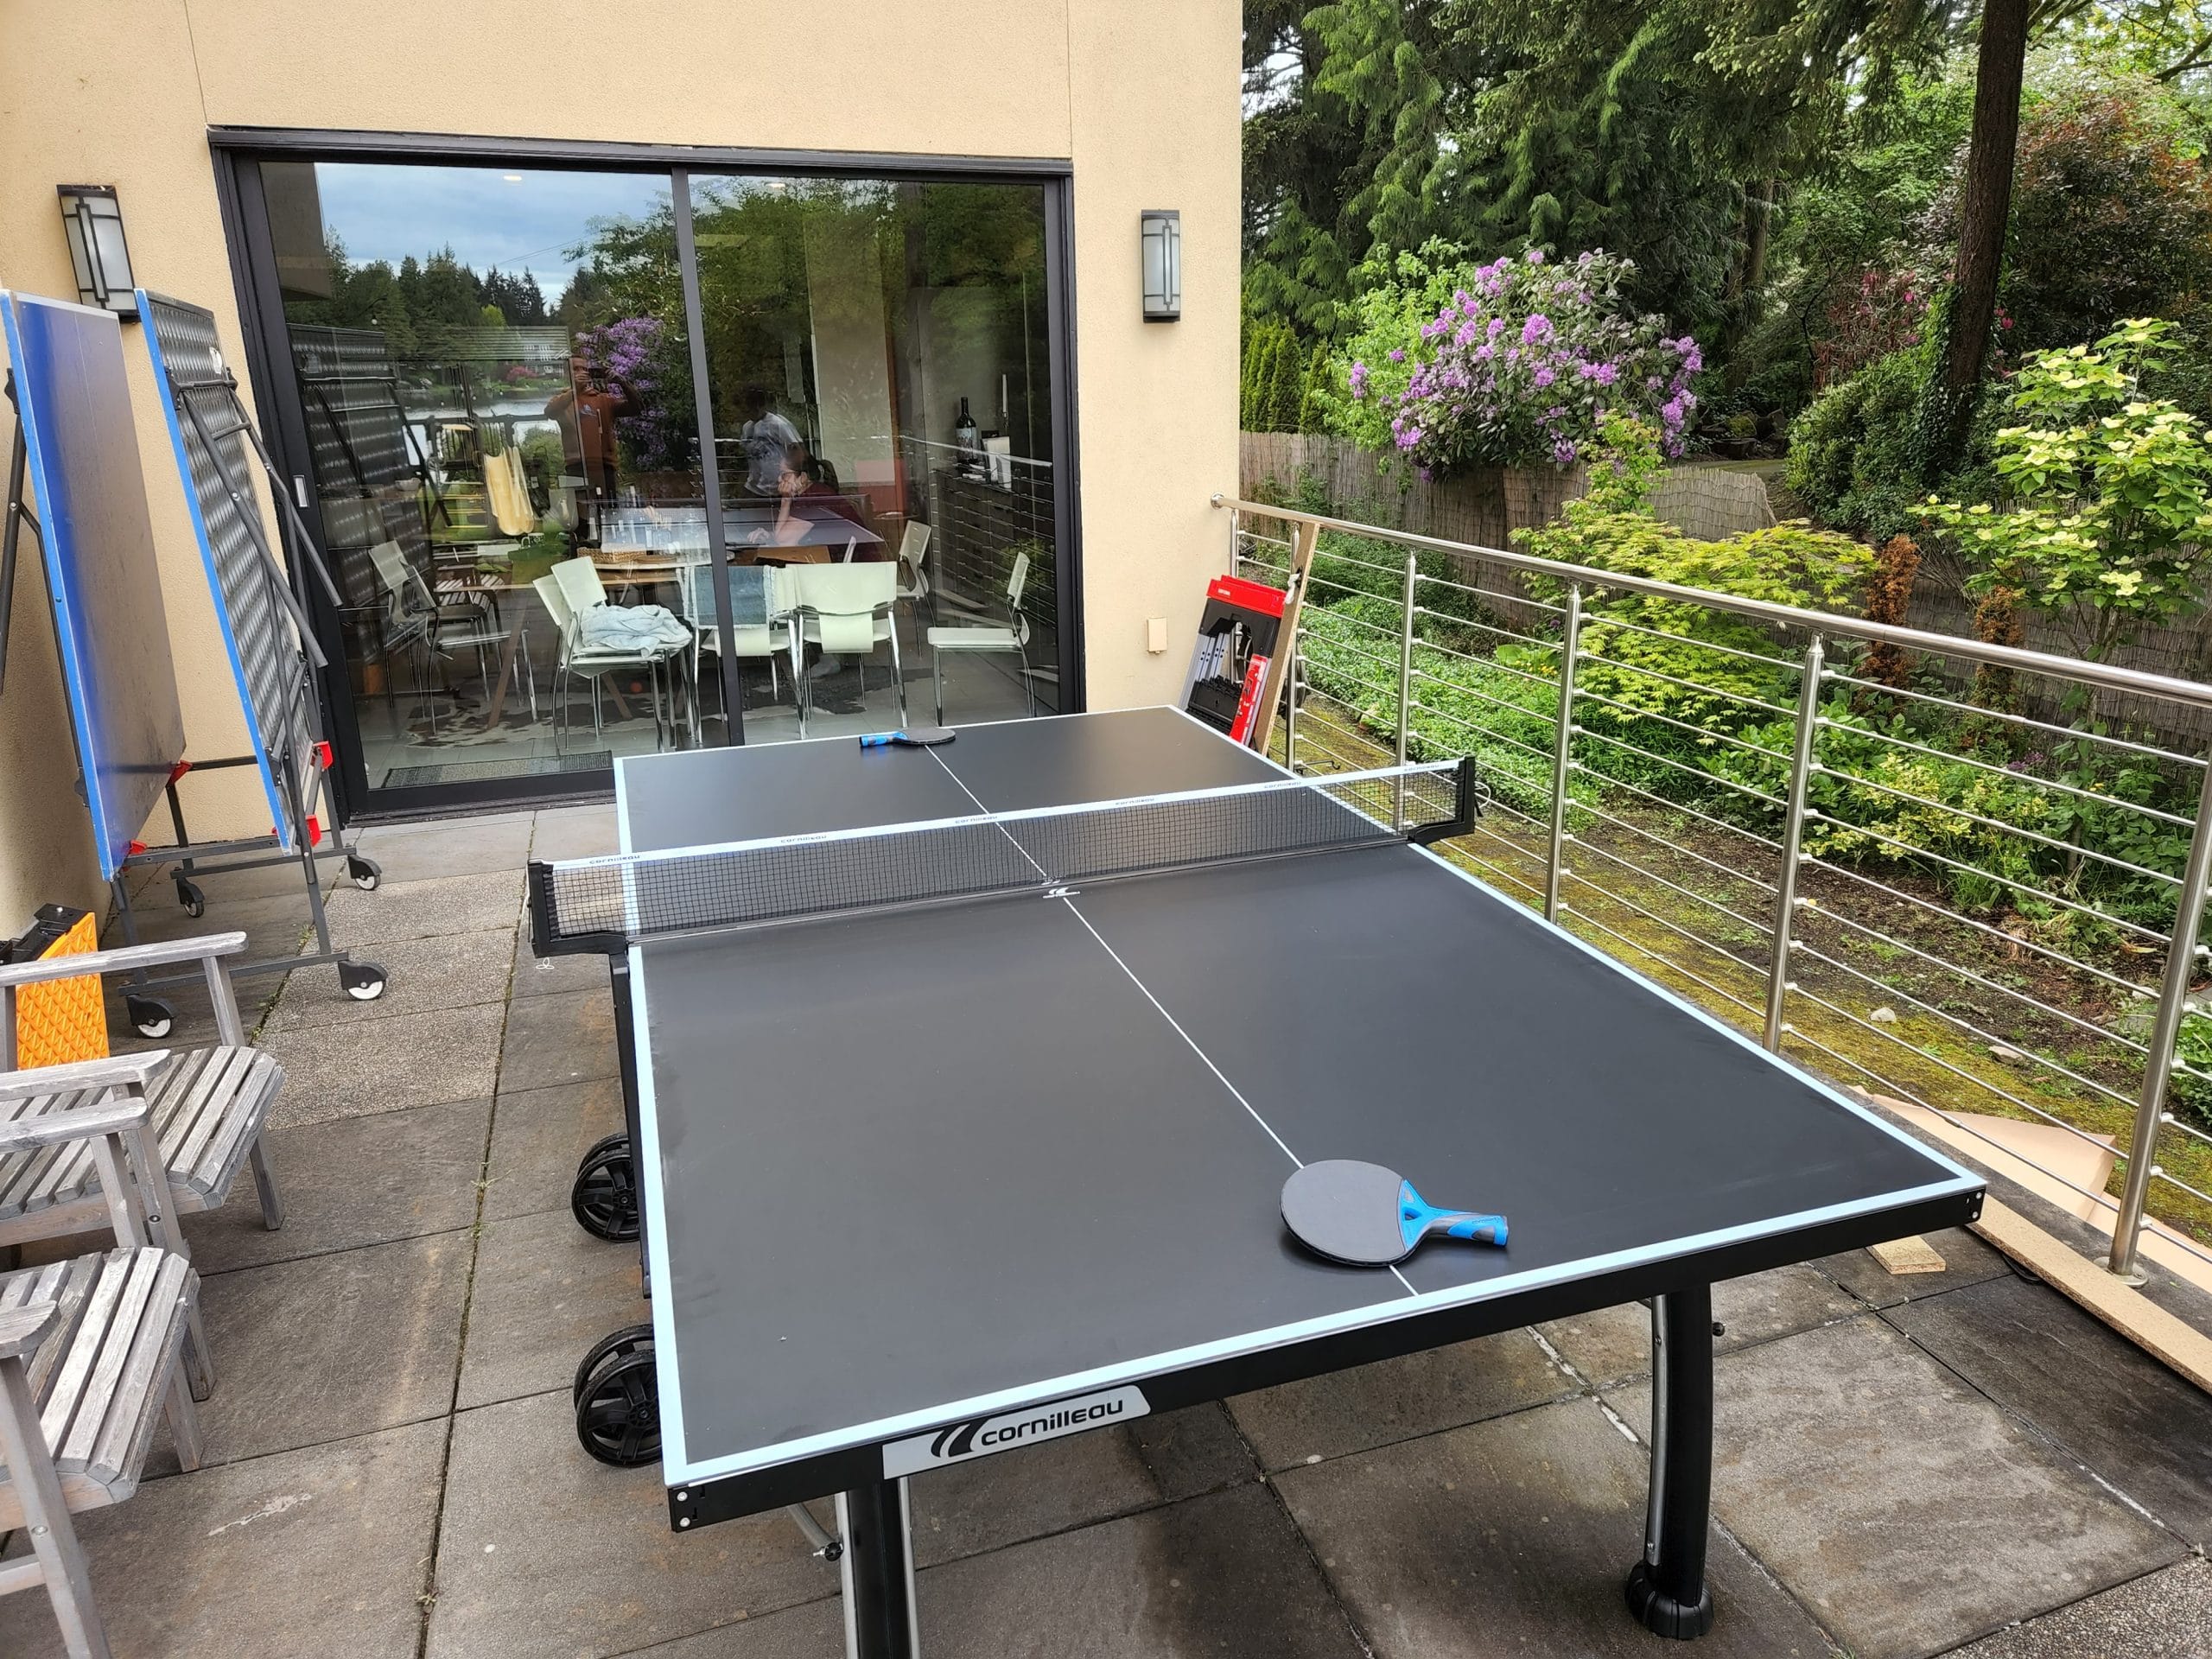 Cornilleau Black Code ping pong table